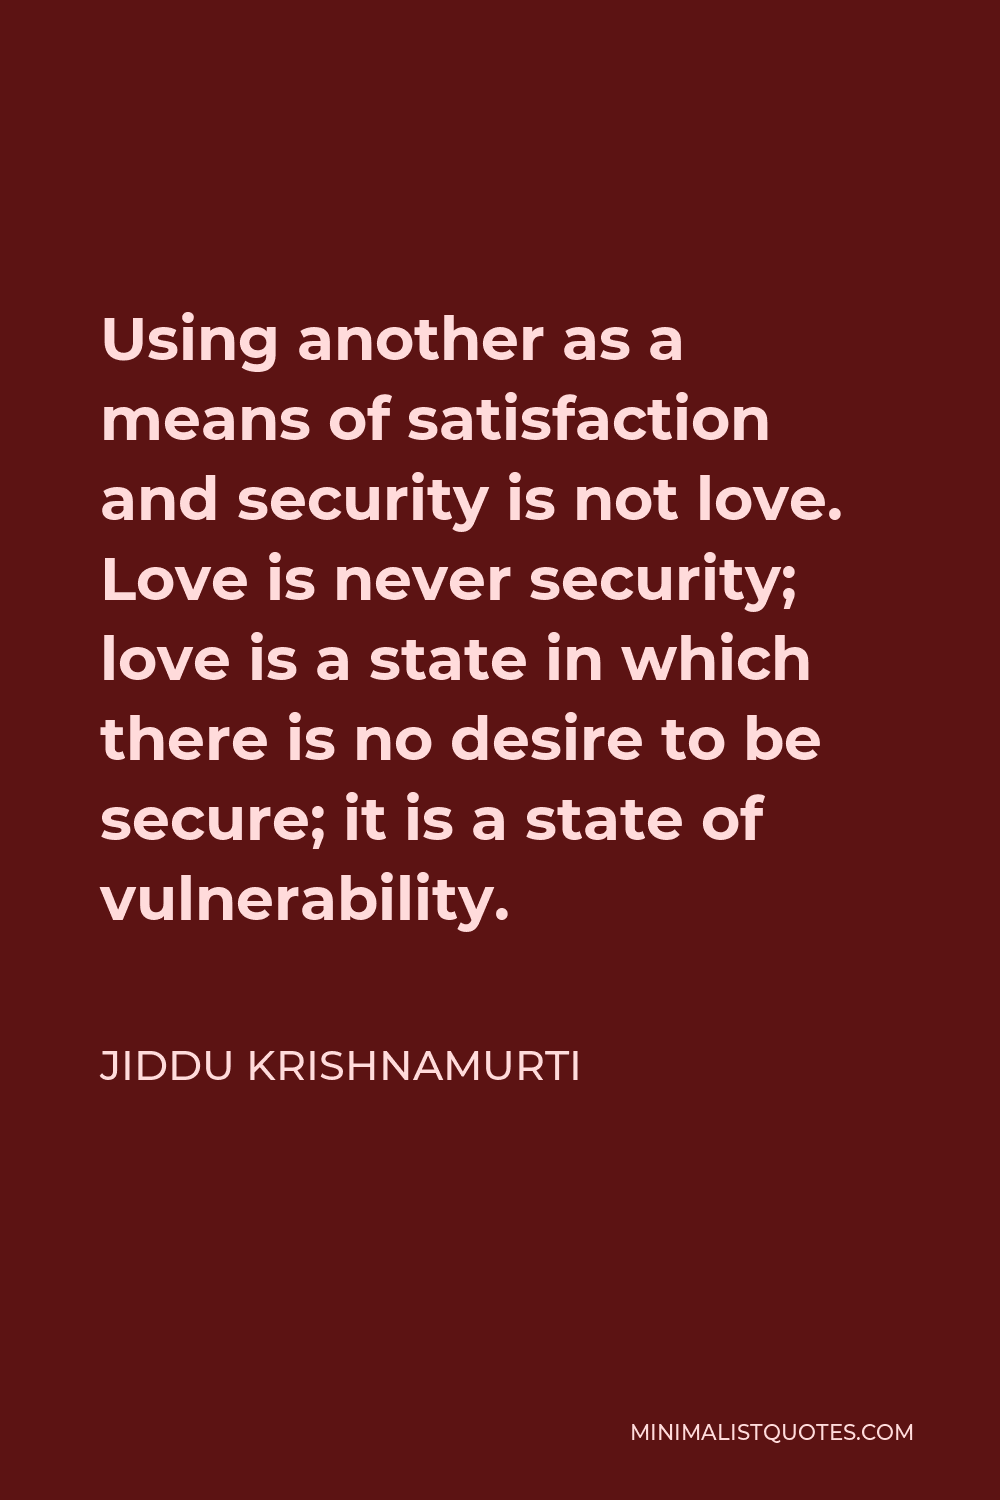 Jiddu Krishnamurti Quote - Using another as a means of satisfaction and security is not love. Love is never security; love is a state in which there is no desire to be secure; it is a state of vulnerability.